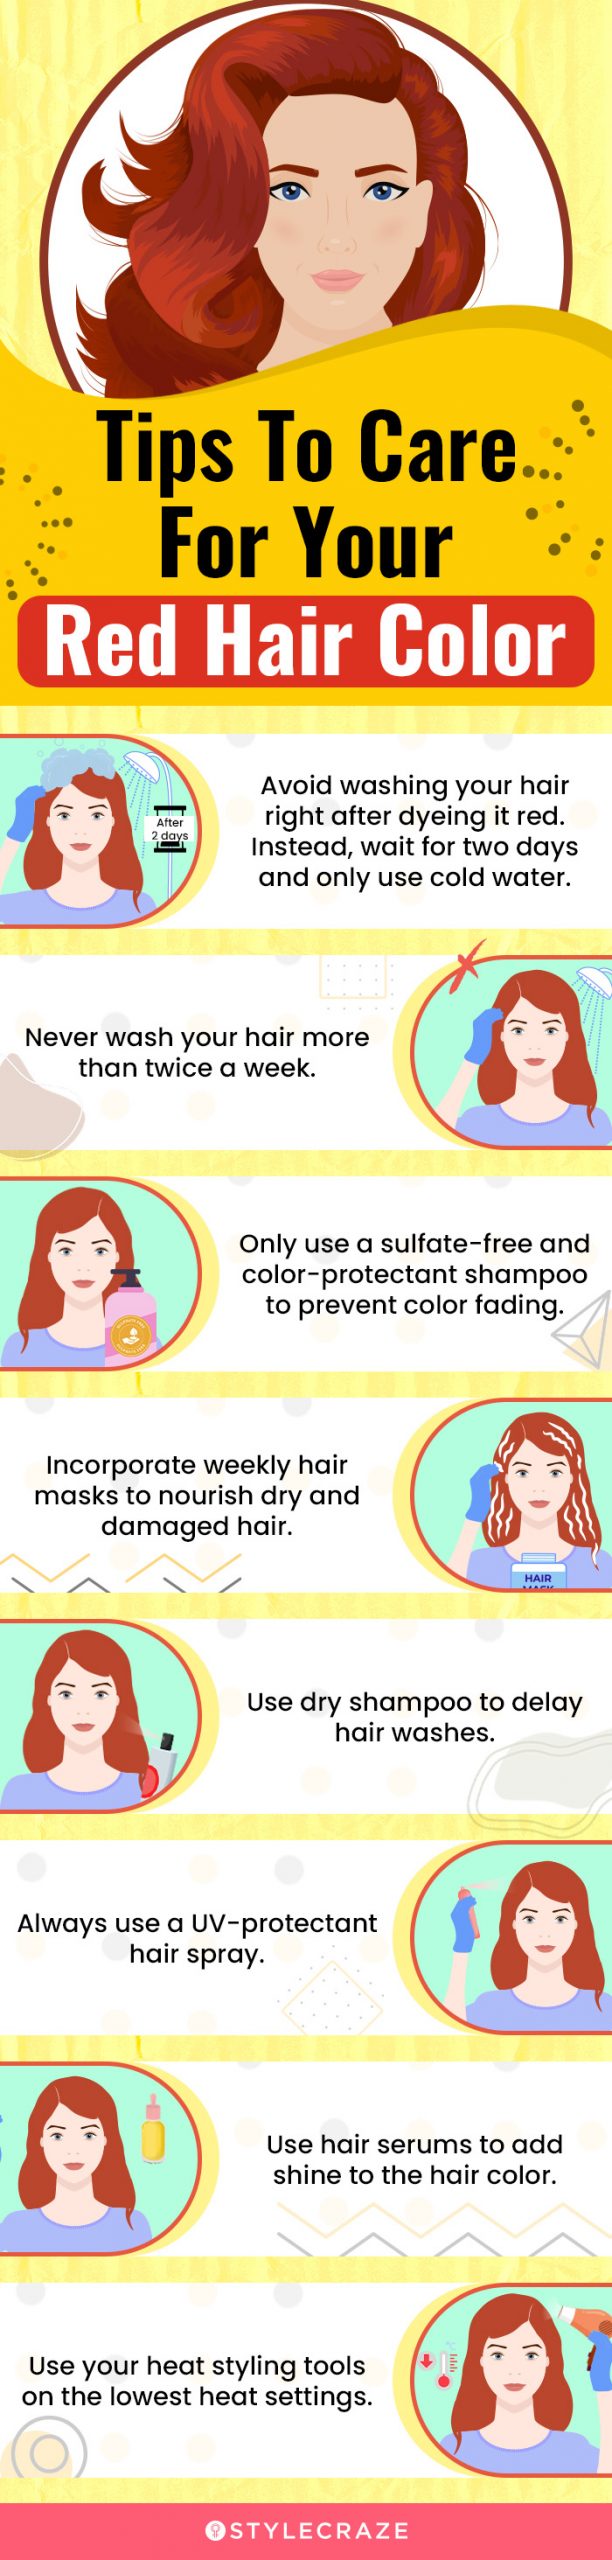 Tips To Care For Your Red Hair Color